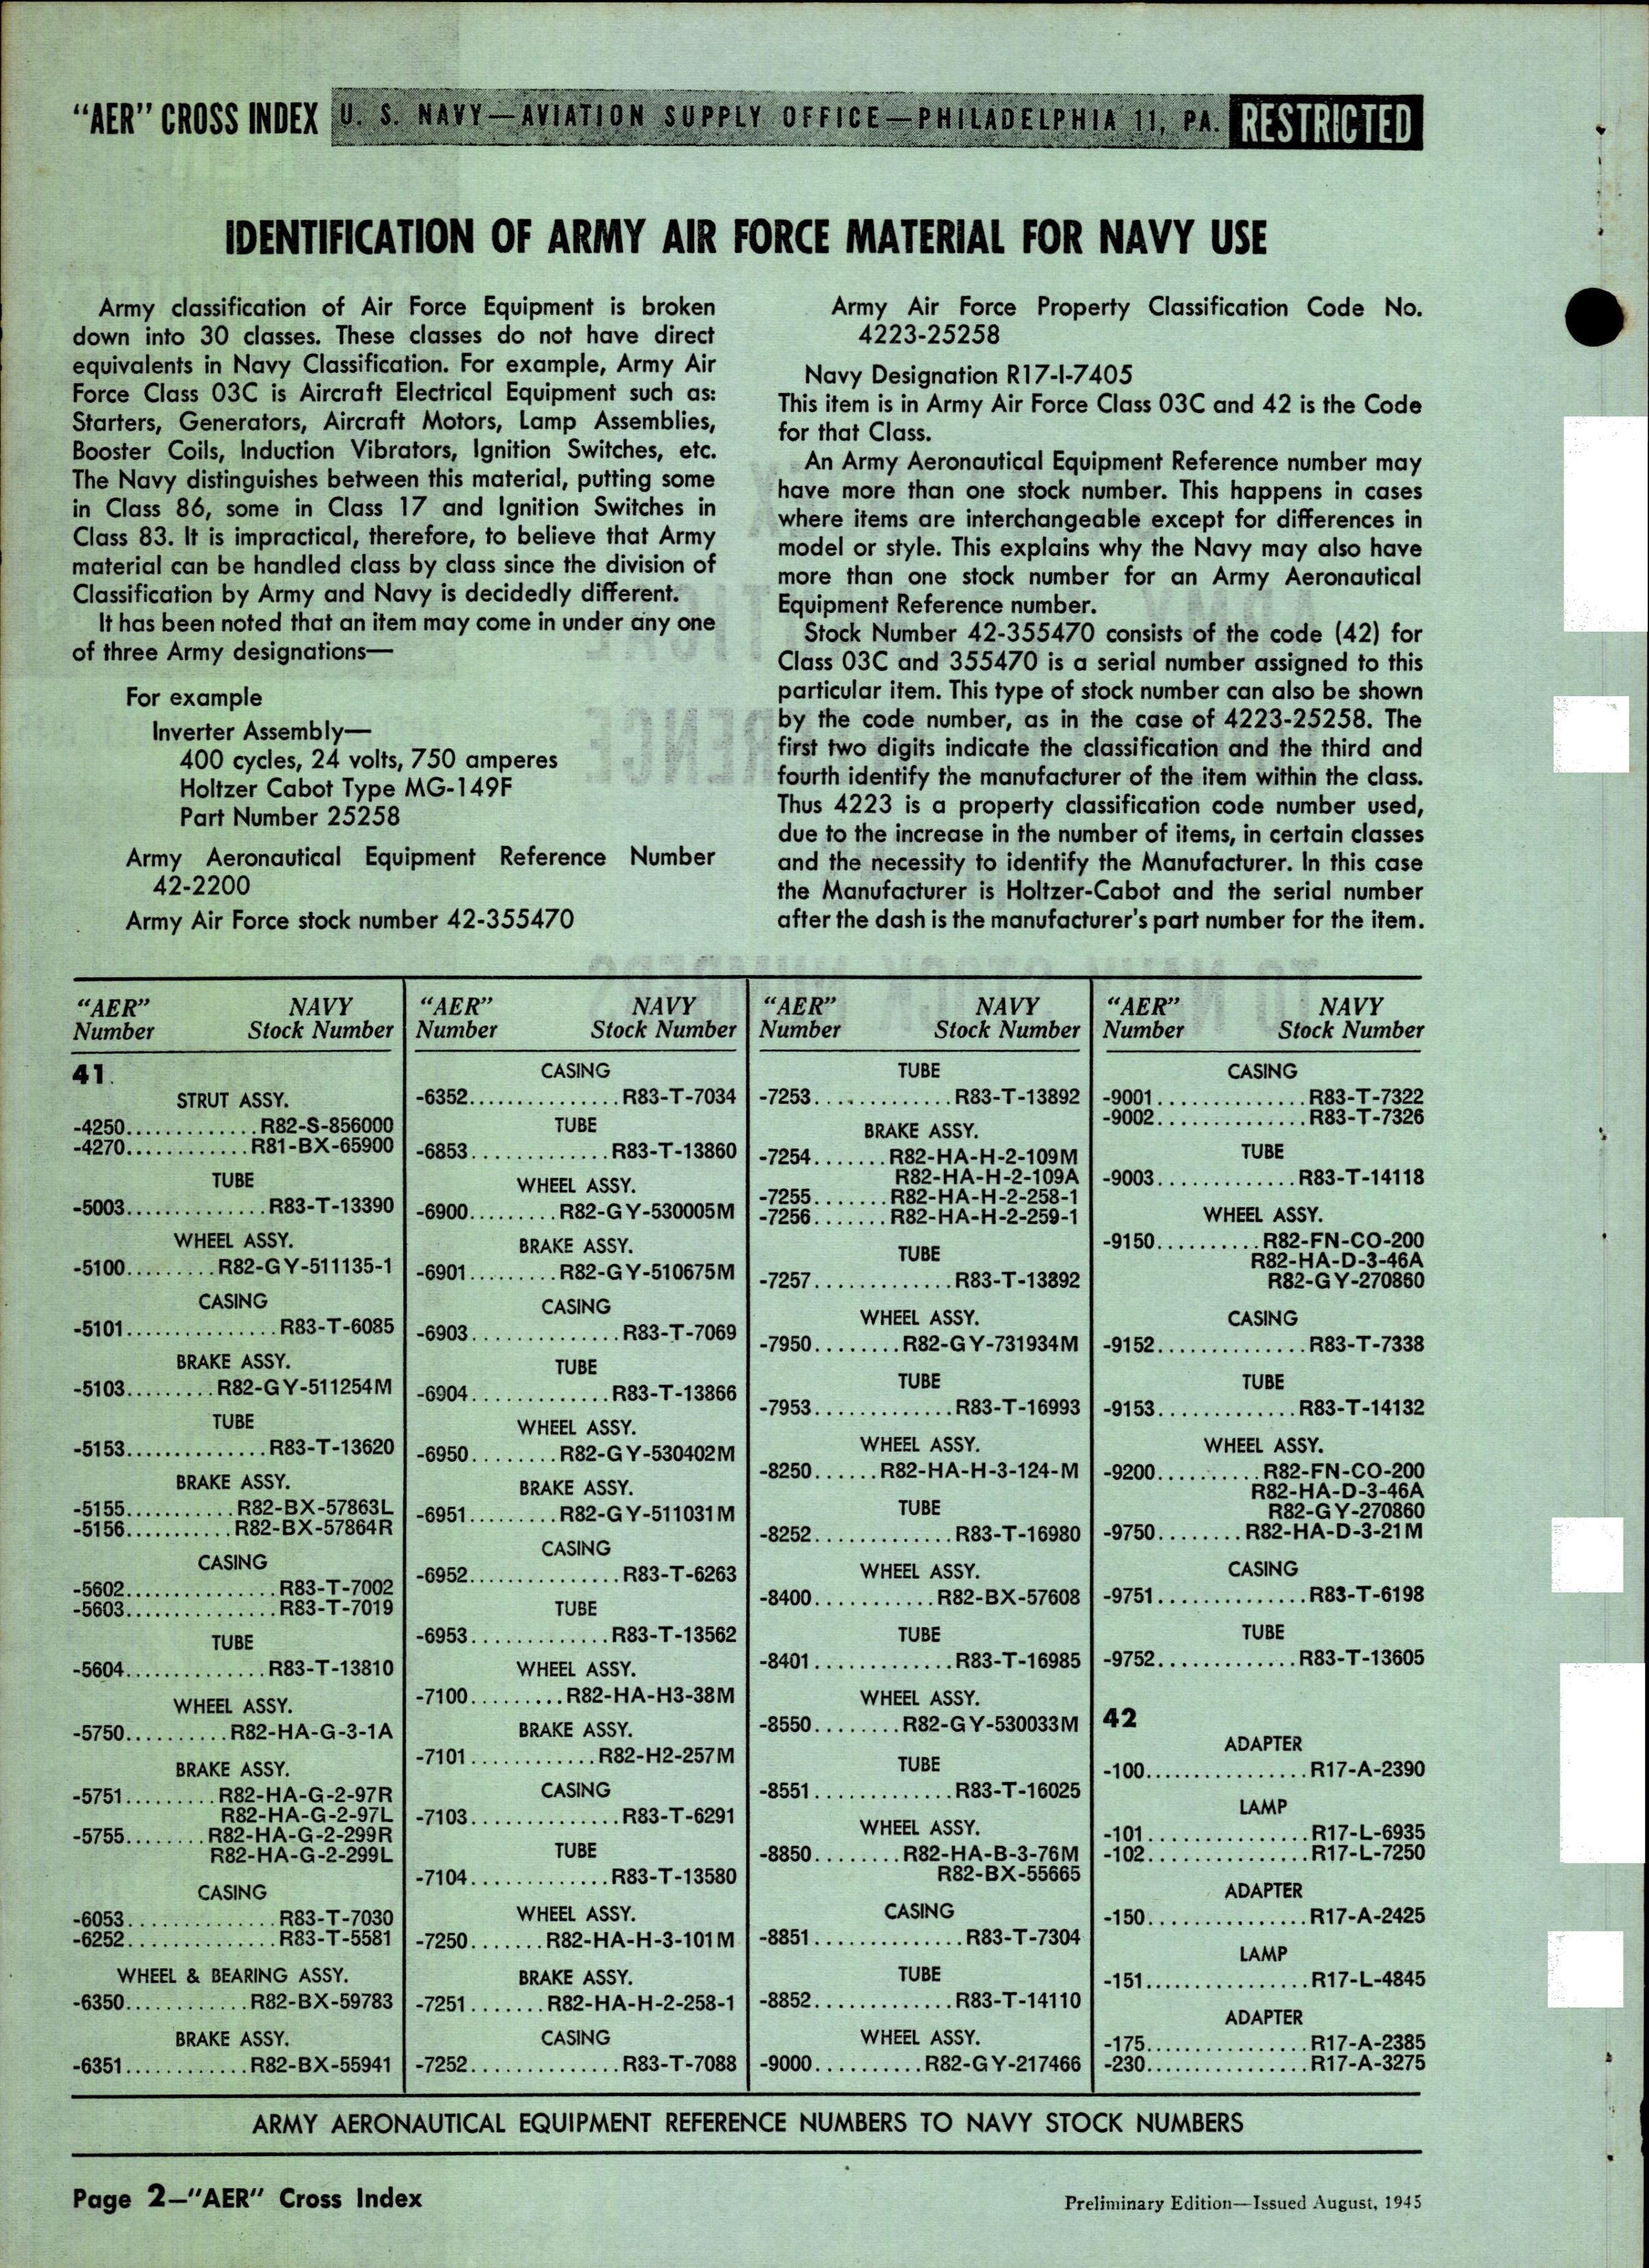 Sample page 2 from AirCorps Library document: Cross Index Army Aeronautical Equipment Reference Numbers to Navy Stock Numbers